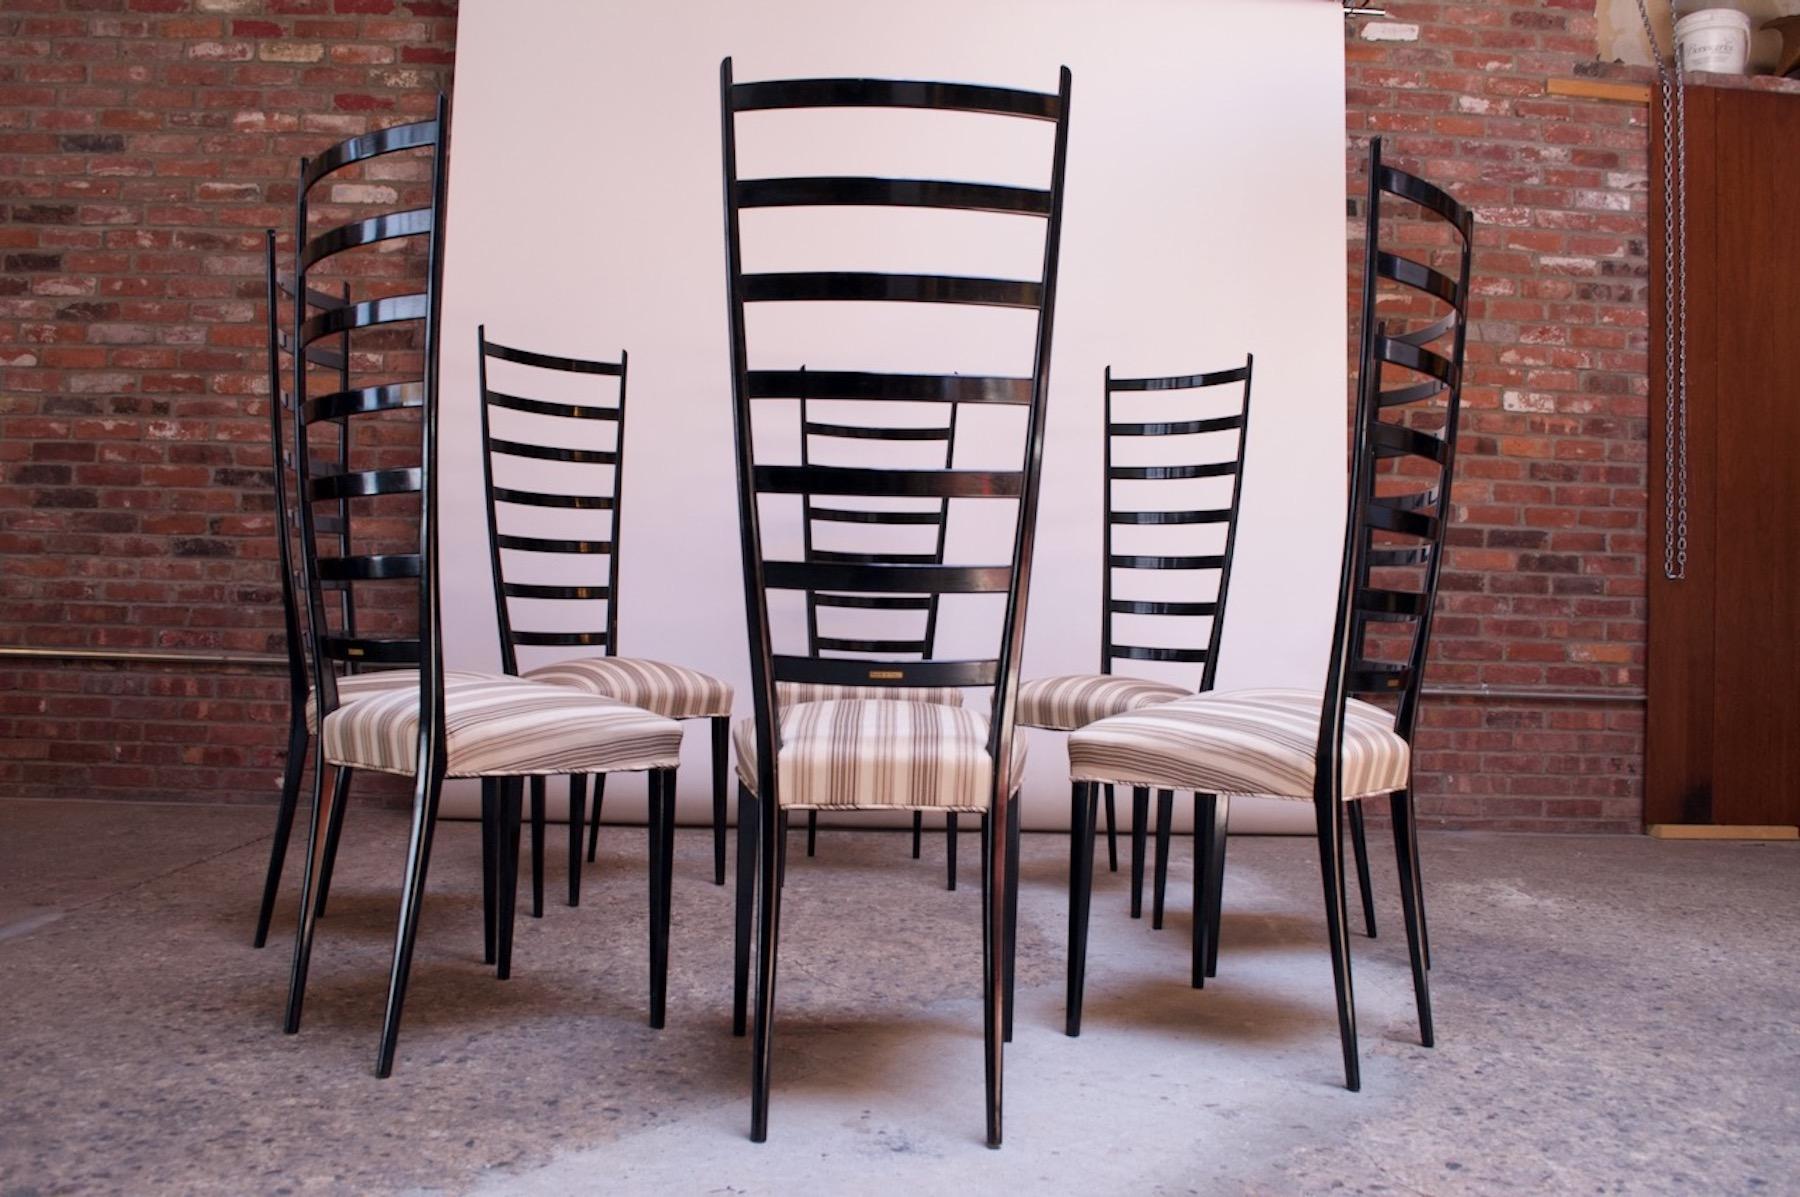 Set of eight sculptural, extra high, ladder-back dining chairs (circa 1950s, Italy) composed of a 7-rung back with upholstered seat. Clean lines and elegant, shapely form. Retains the original black lacquer -- hand-applied, not sprayed. Extremely